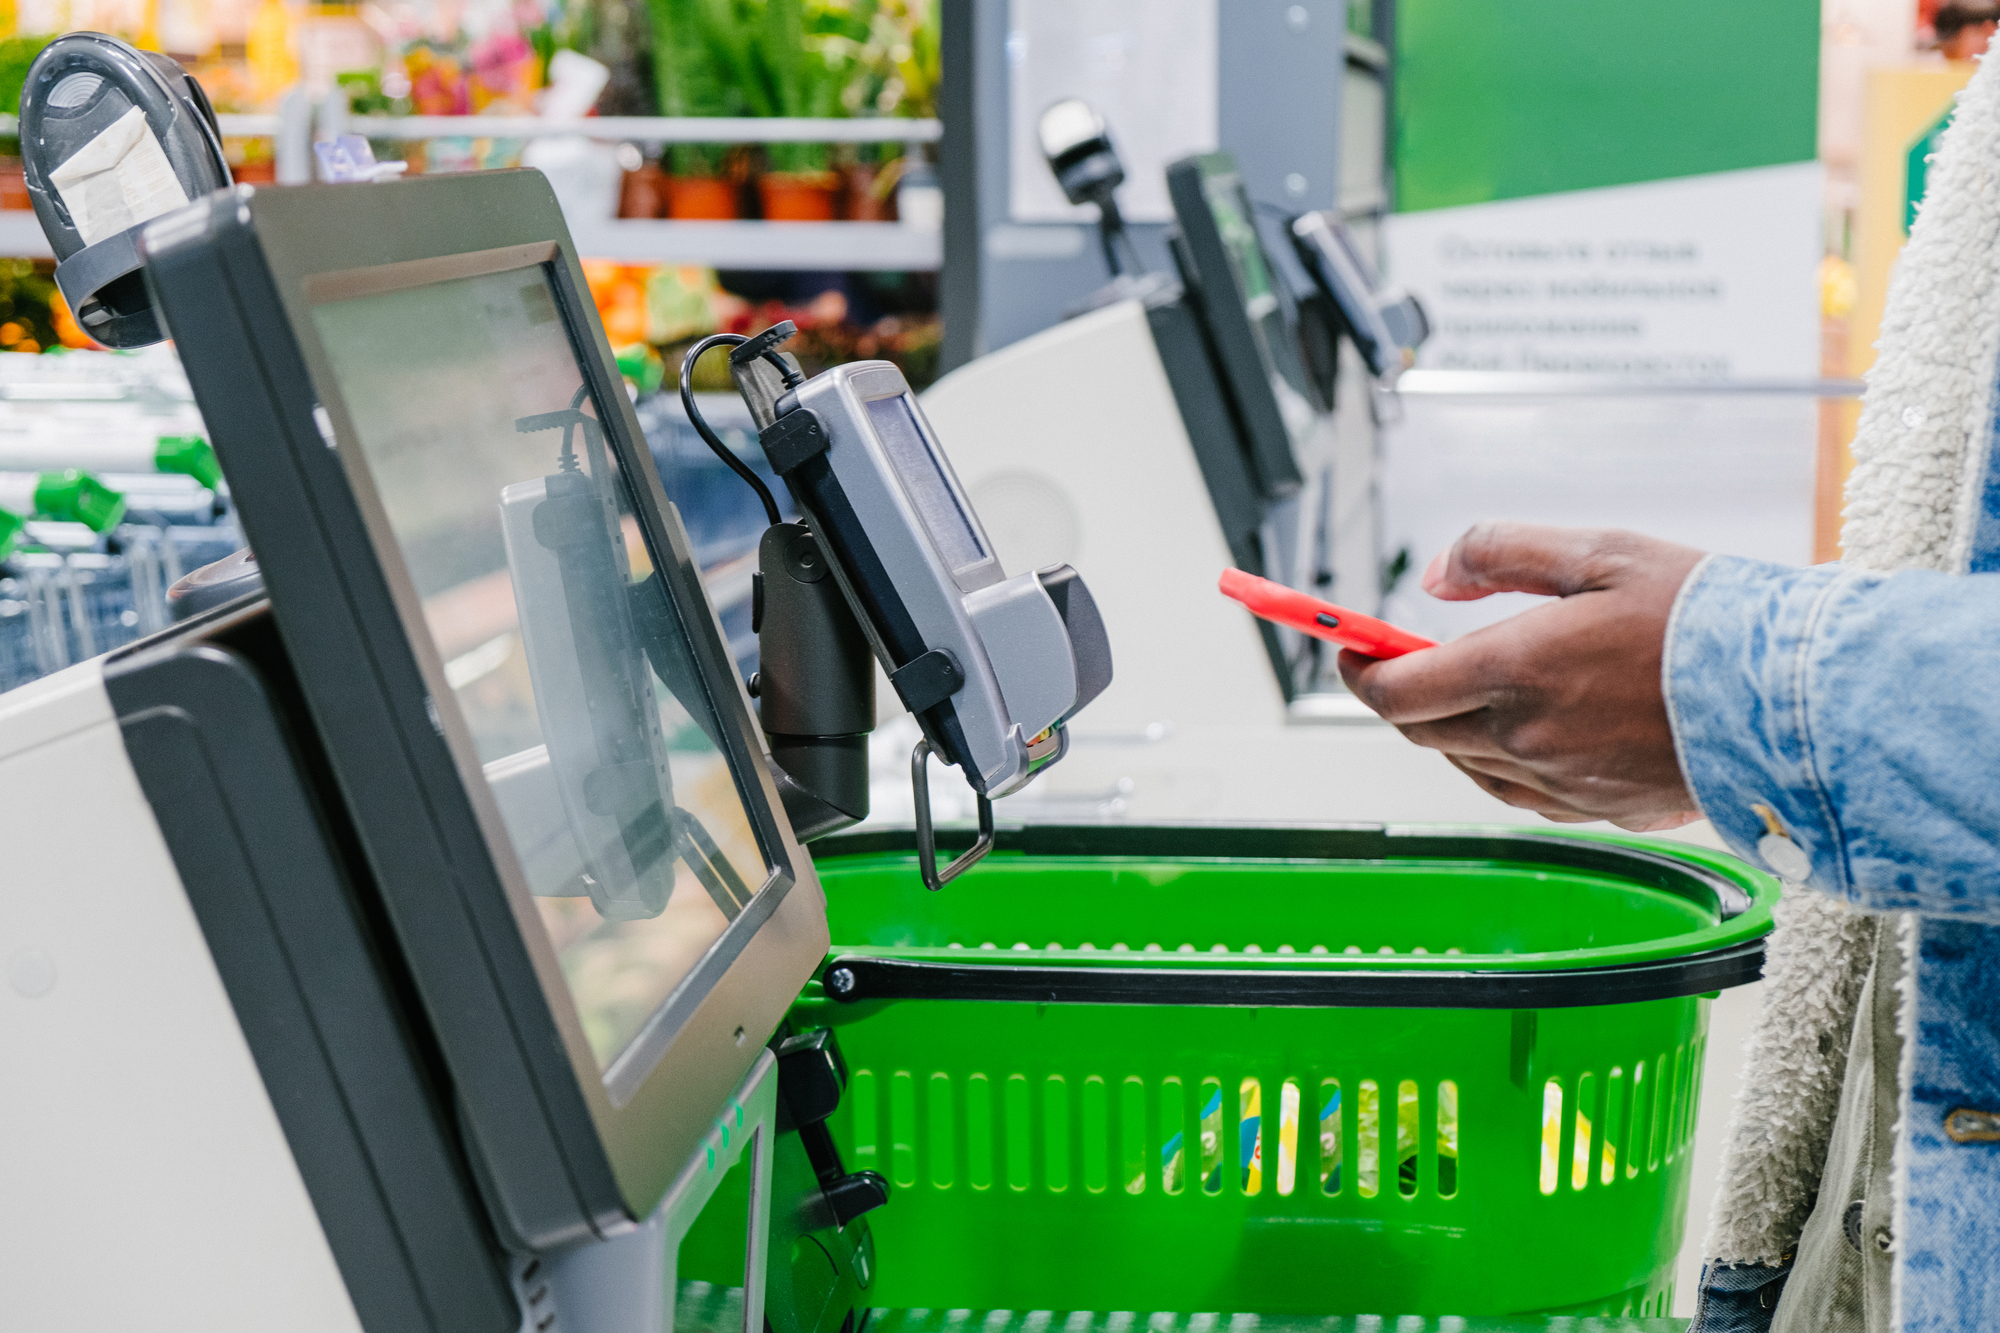 10 Things We All Secretly Despise About Self-Checkout